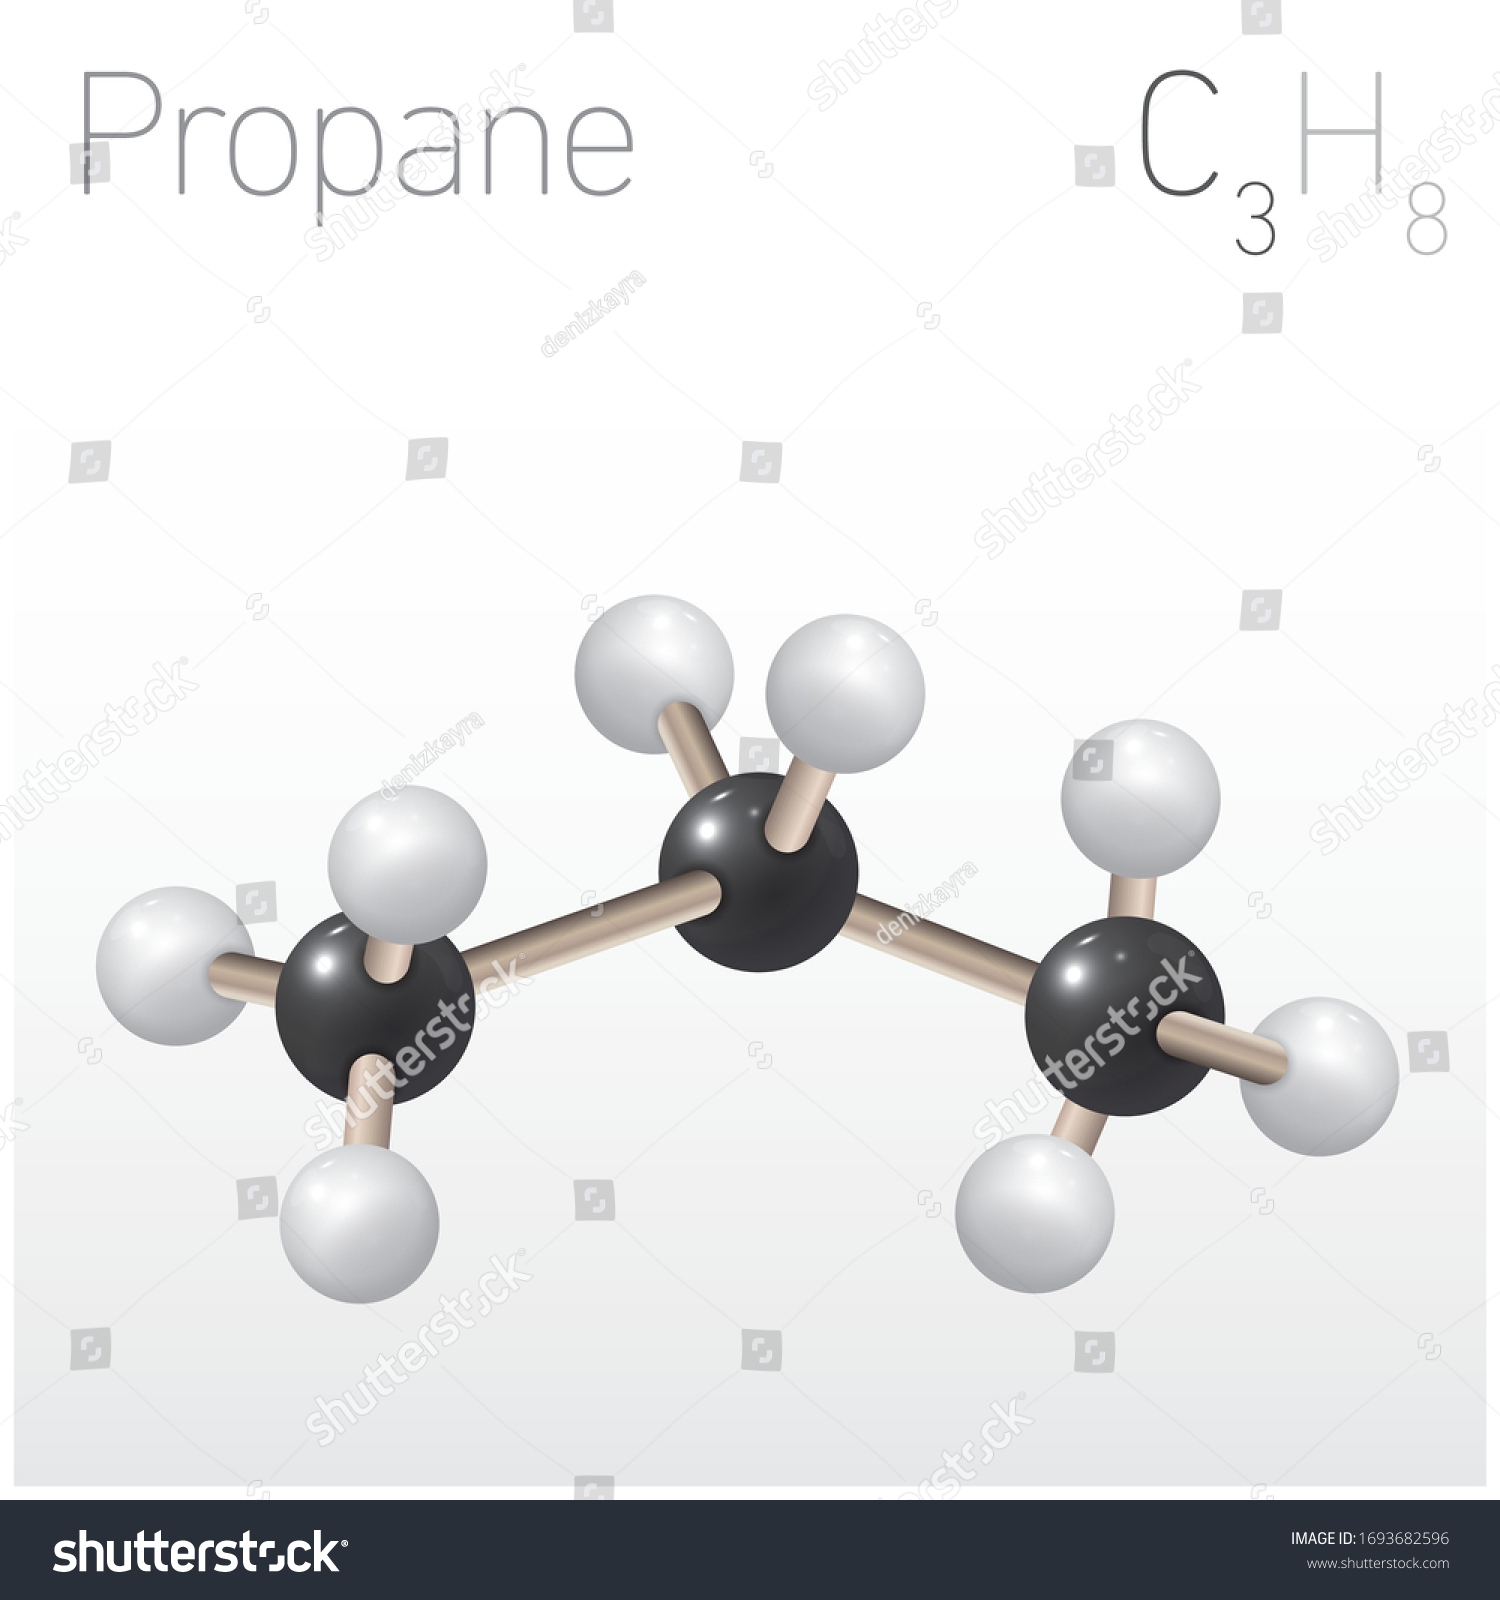 Propane C3h8 Structural Chemical Formula Molecule Stock Vector (Royalty ...